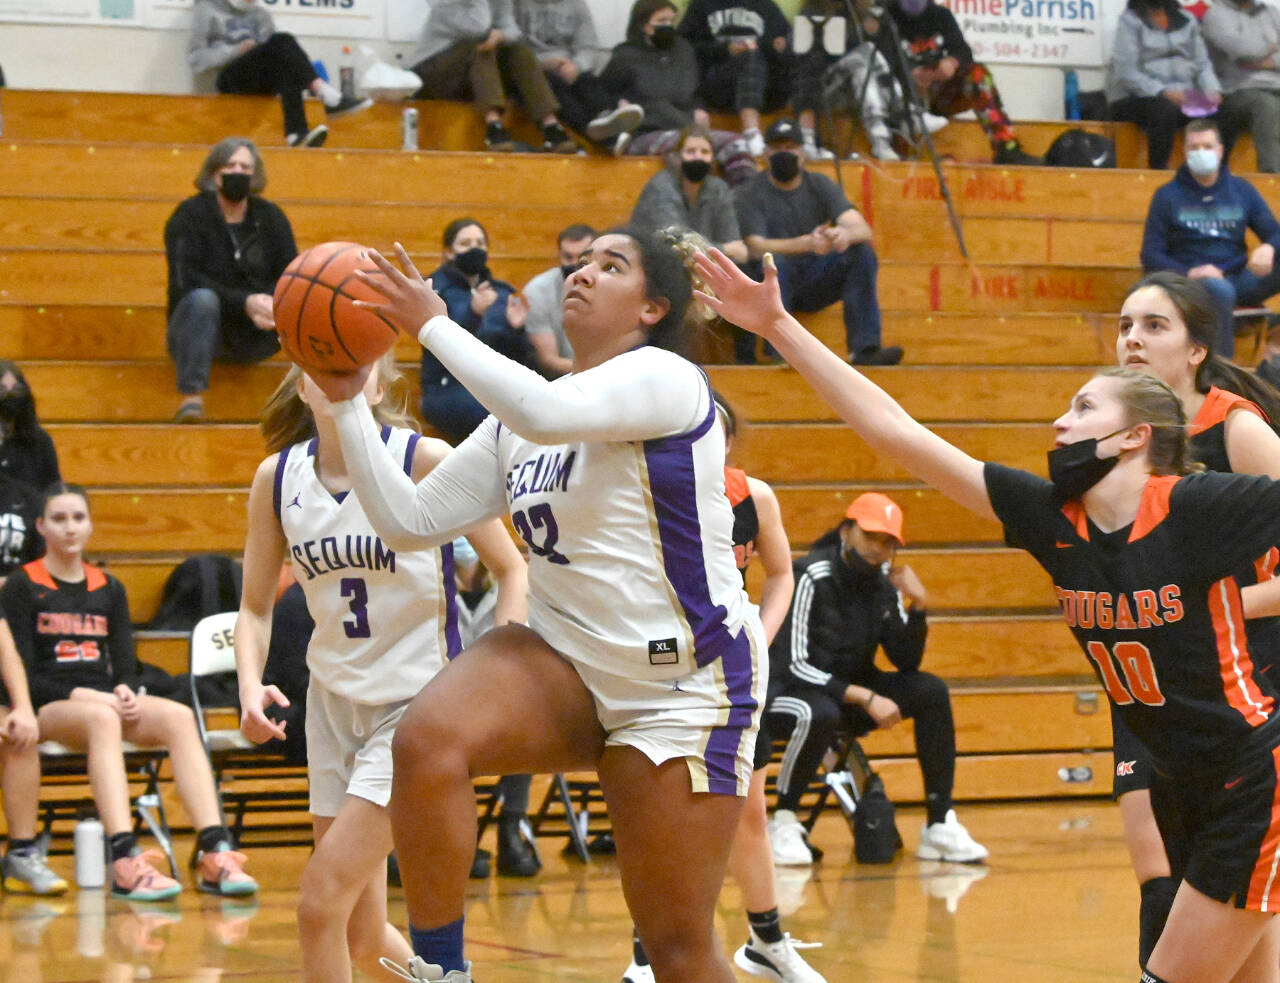 Sequim’s Jelissa Julmist drives to the basket against Central Kitsap on Monday in Sequim. Also in on the play is Sequim’s Sammie Bacon (3). (Michael Dashiell/Olympic Peninsula News Group)